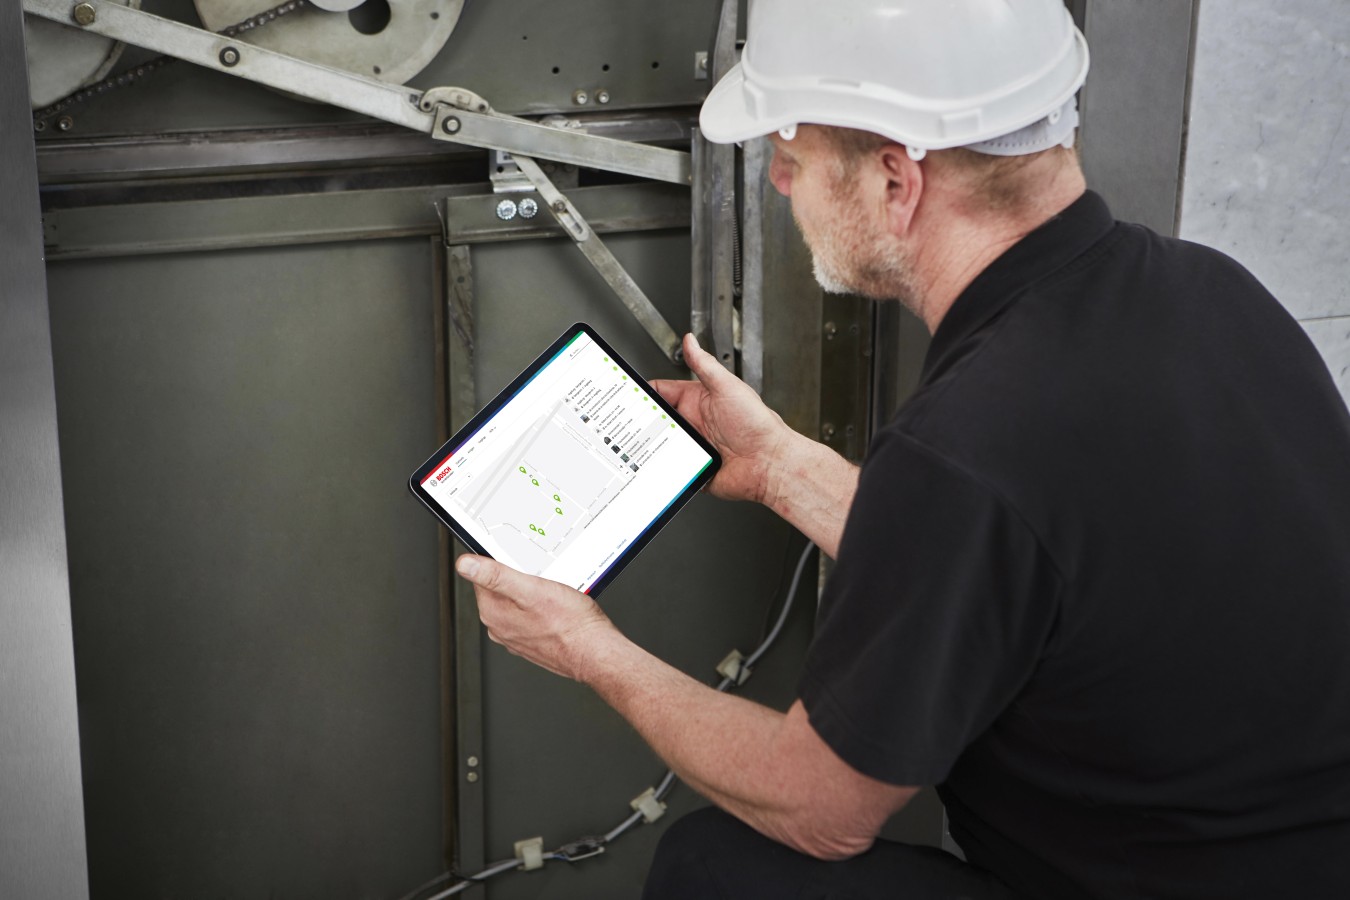 Elevator Monitoring by Bosch Service Solutions shortens downtimes and